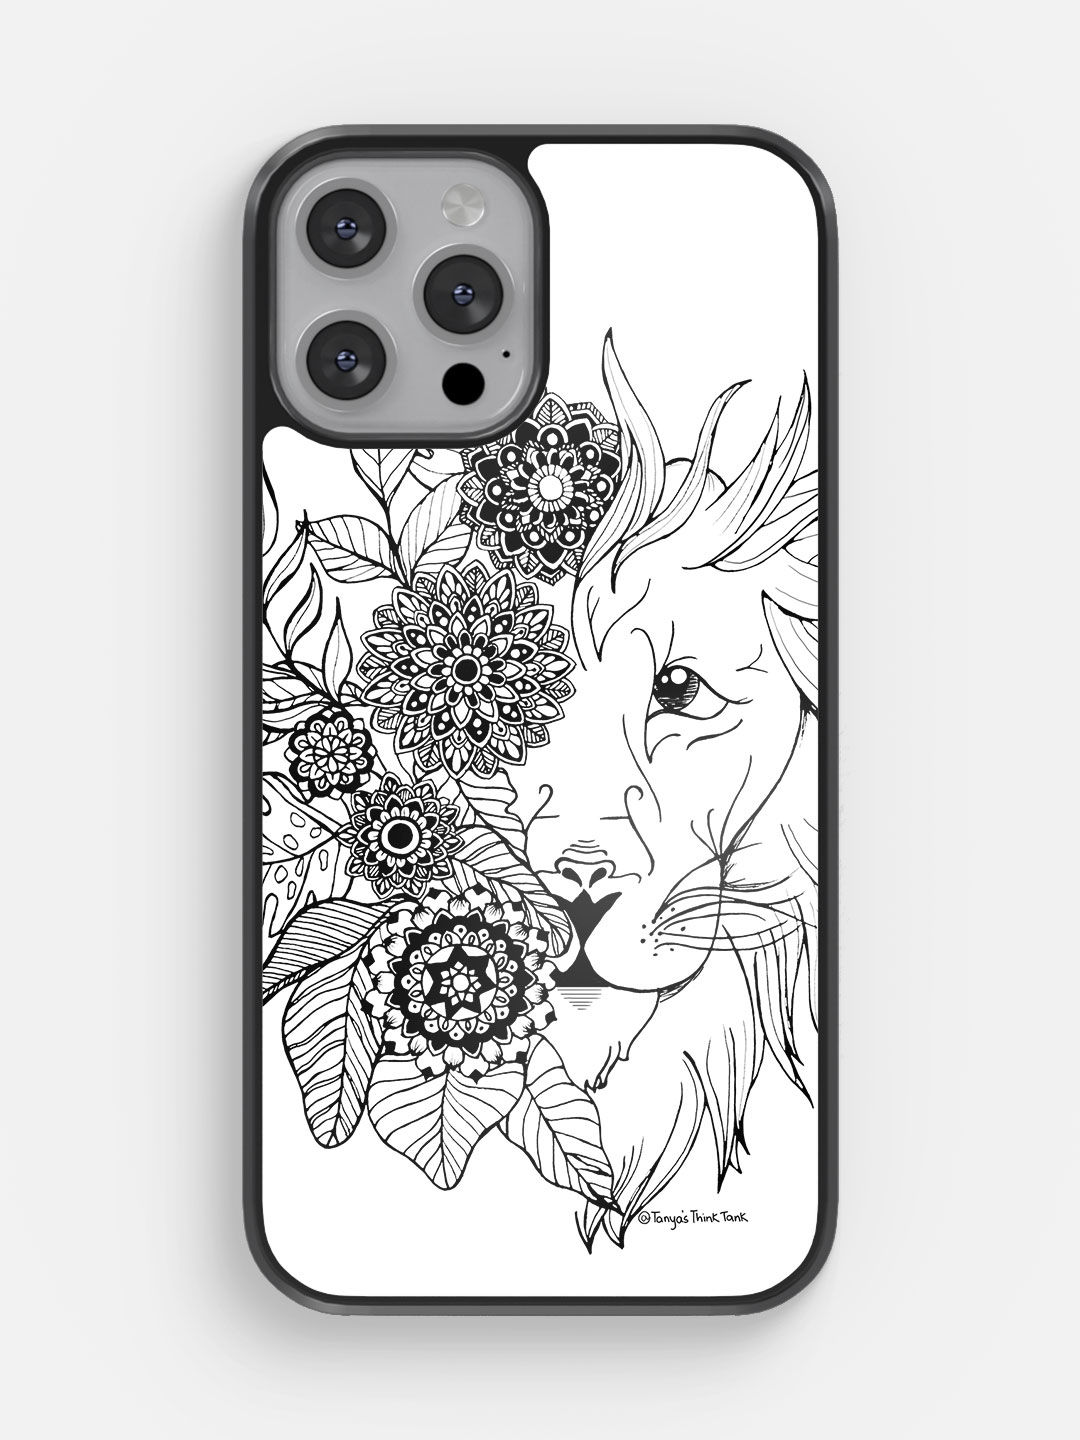 Buy Lion - Bumper Phone Case for iPhone 12 Pro Max Phone Cases & Covers Online